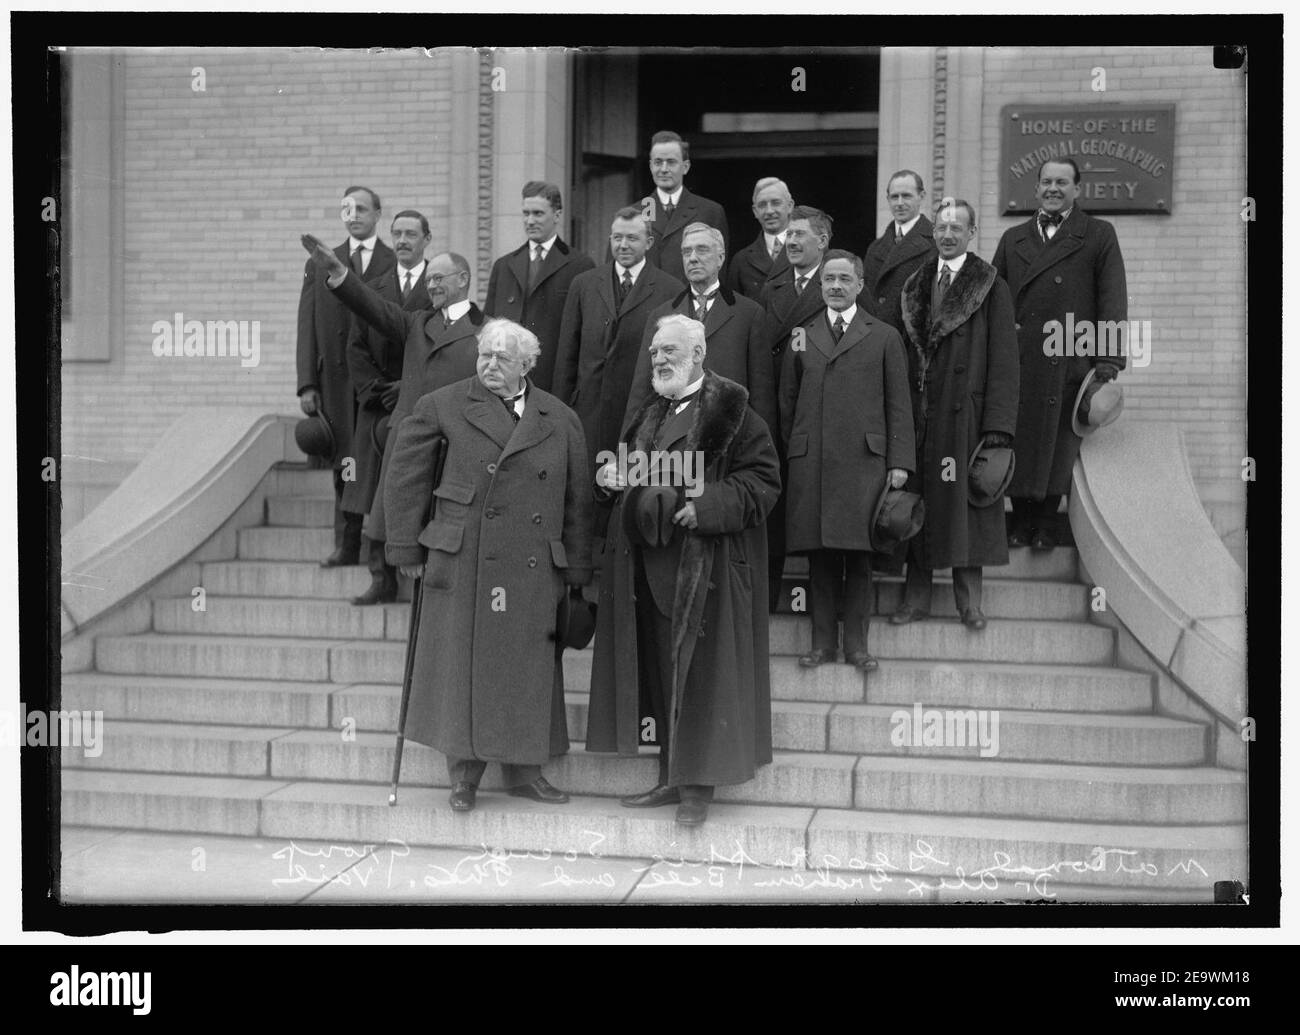 NATIONAL GEOGRAPHICAL SOCIETY. ANNIVERSARY OF BELL TELEPHONE. FRONT- THEODORE N. VAIL AND ALEXANDER GRAHAM BELL; BACK OF BELL, THOMAS A WATSON, ASSOC. WITH BELL IN EXPERIMENTS. DIAGONALLY Stock Photo